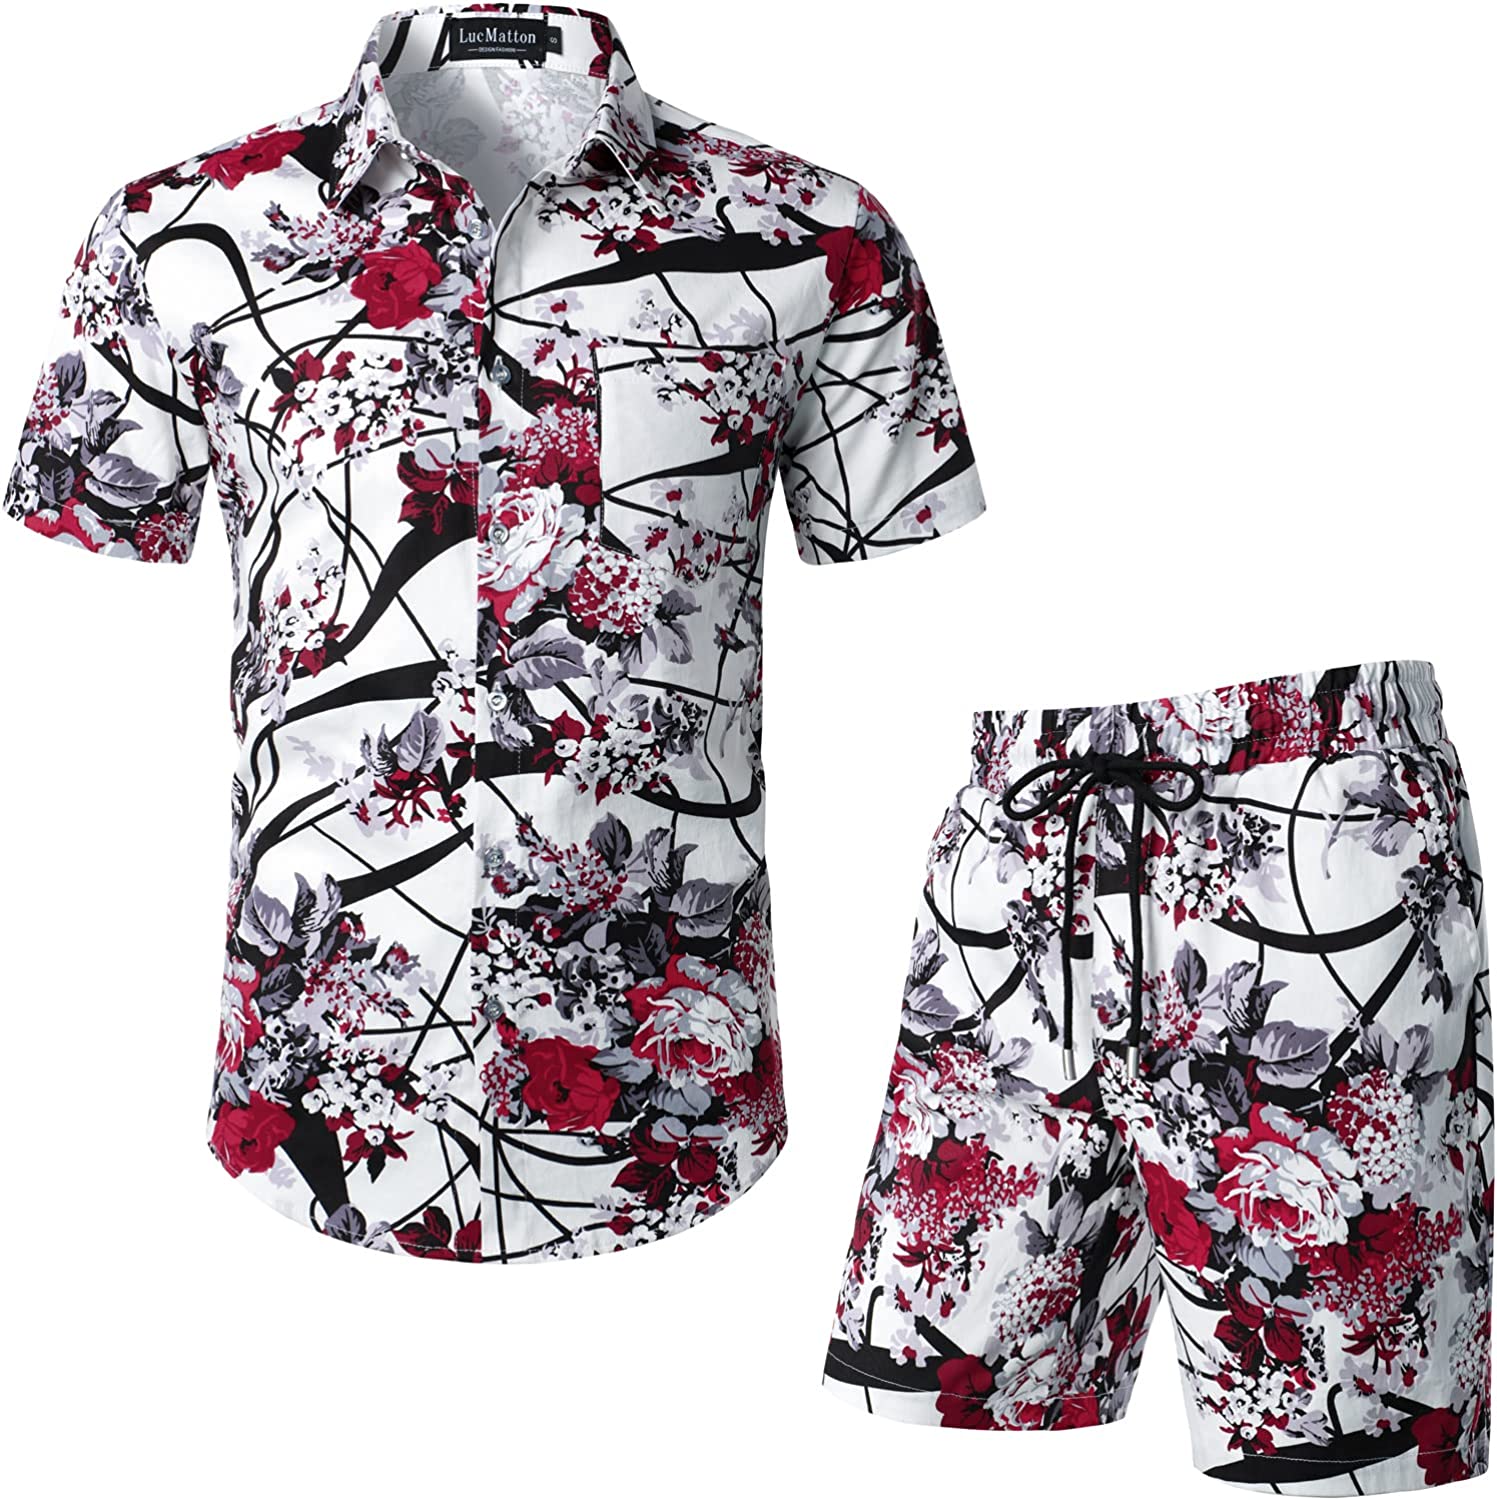 LucMatton Men's 2 Piece Floral Outfits Hipster Short Sleeve Button Down Shirt and Shorts Set 